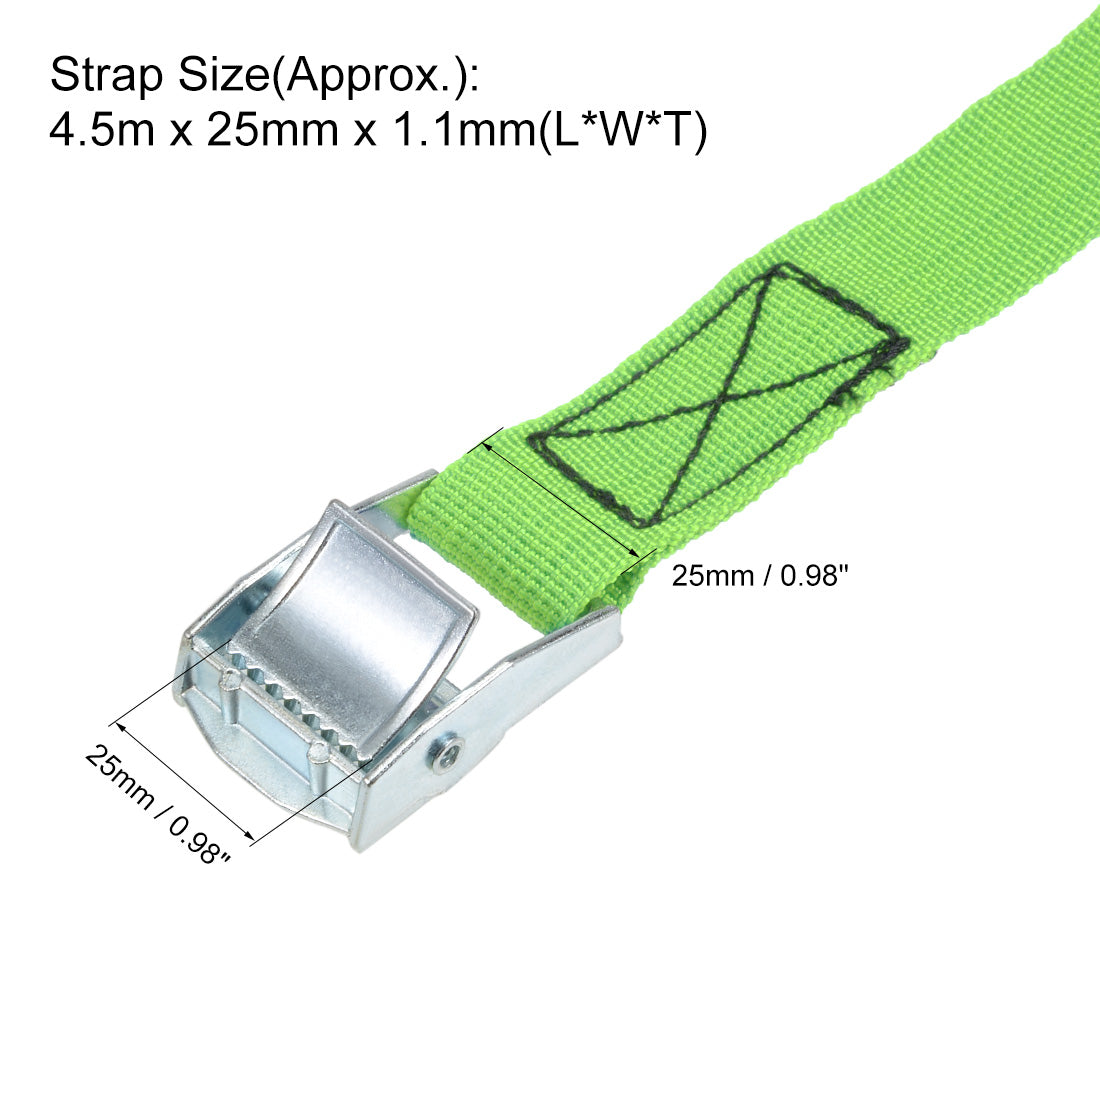 uxcell Uxcell Lashing Strap 1" x 15' Cargo Tie Down Straps with Cam Lock Buckle Up to 551lbs Green 4pcs